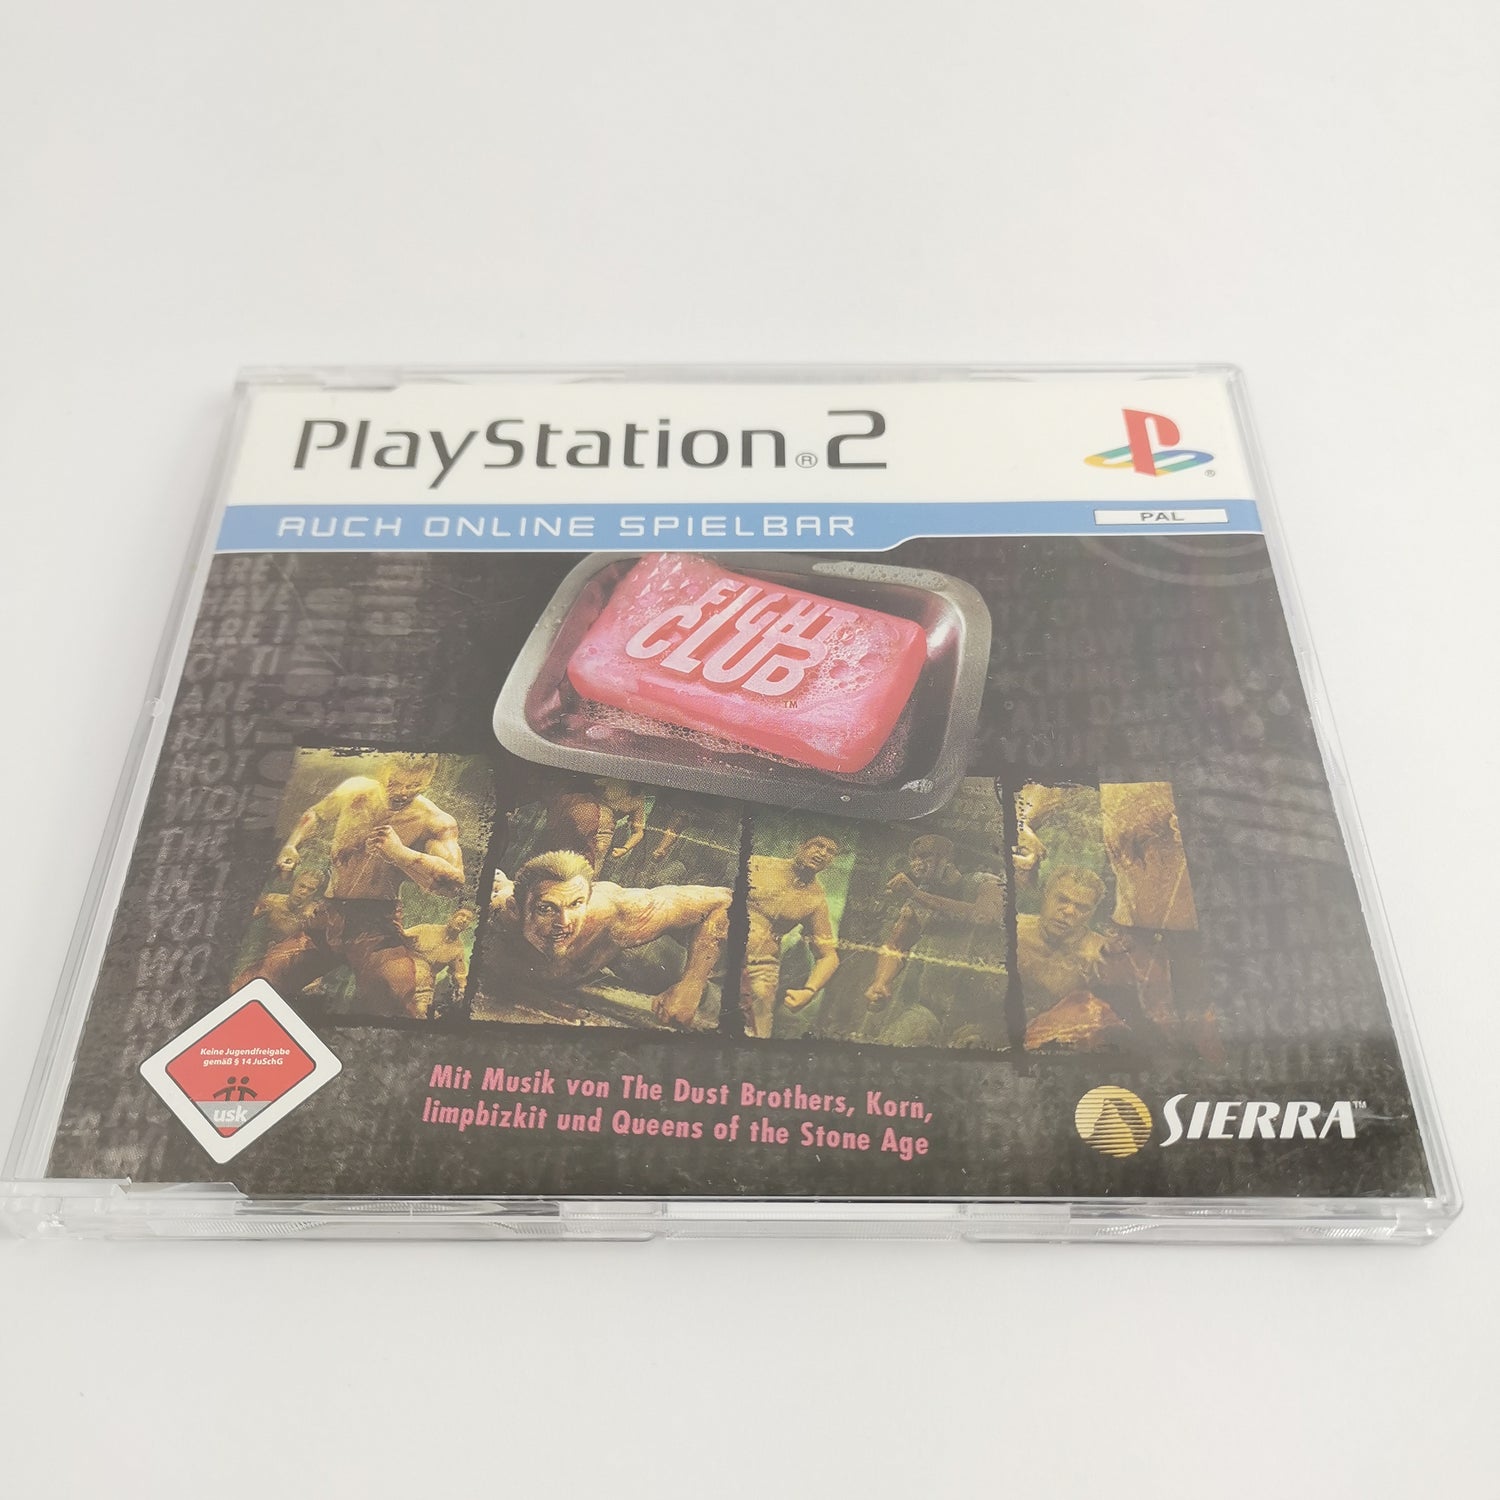 Sony Playstation 2 Promo Game: Fight Club - Full Version USK18 | PS2 OVP PAL